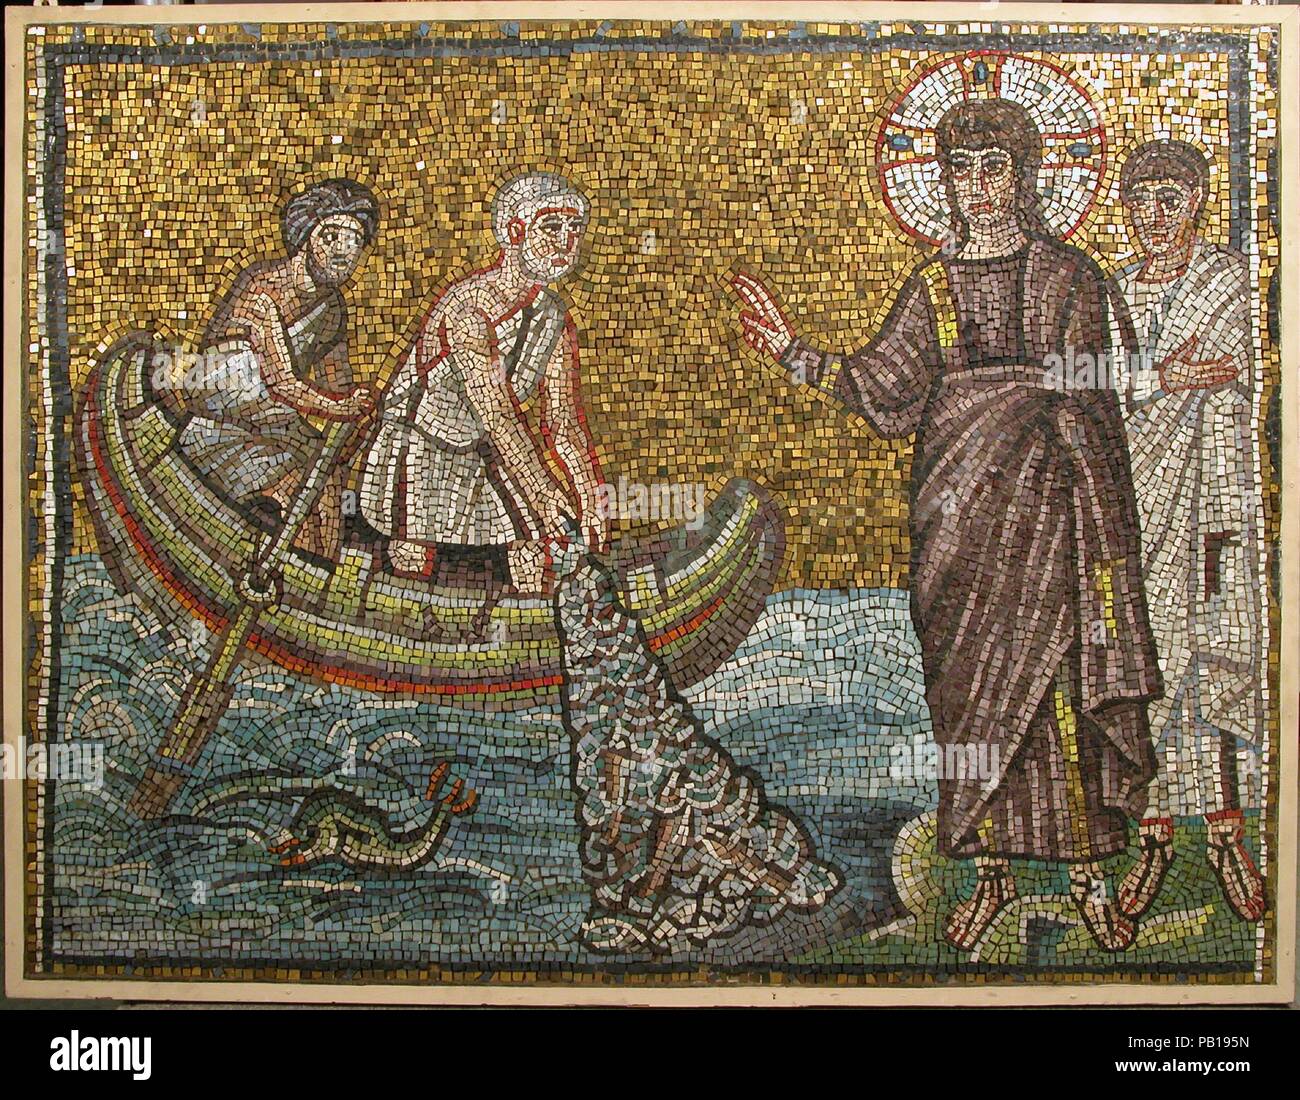 Miraculous Draught of Fishes. Culture: Byzantine. Dimensions: Overall: 40 1/4 x 52 1/4 x 1 3/8 in. (102.2 x 132.7 x 3.5 cm). Date: early 20th century (original dated early 6th century). Museum: Metropolitan Museum of Art, New York, USA. Stock Photo